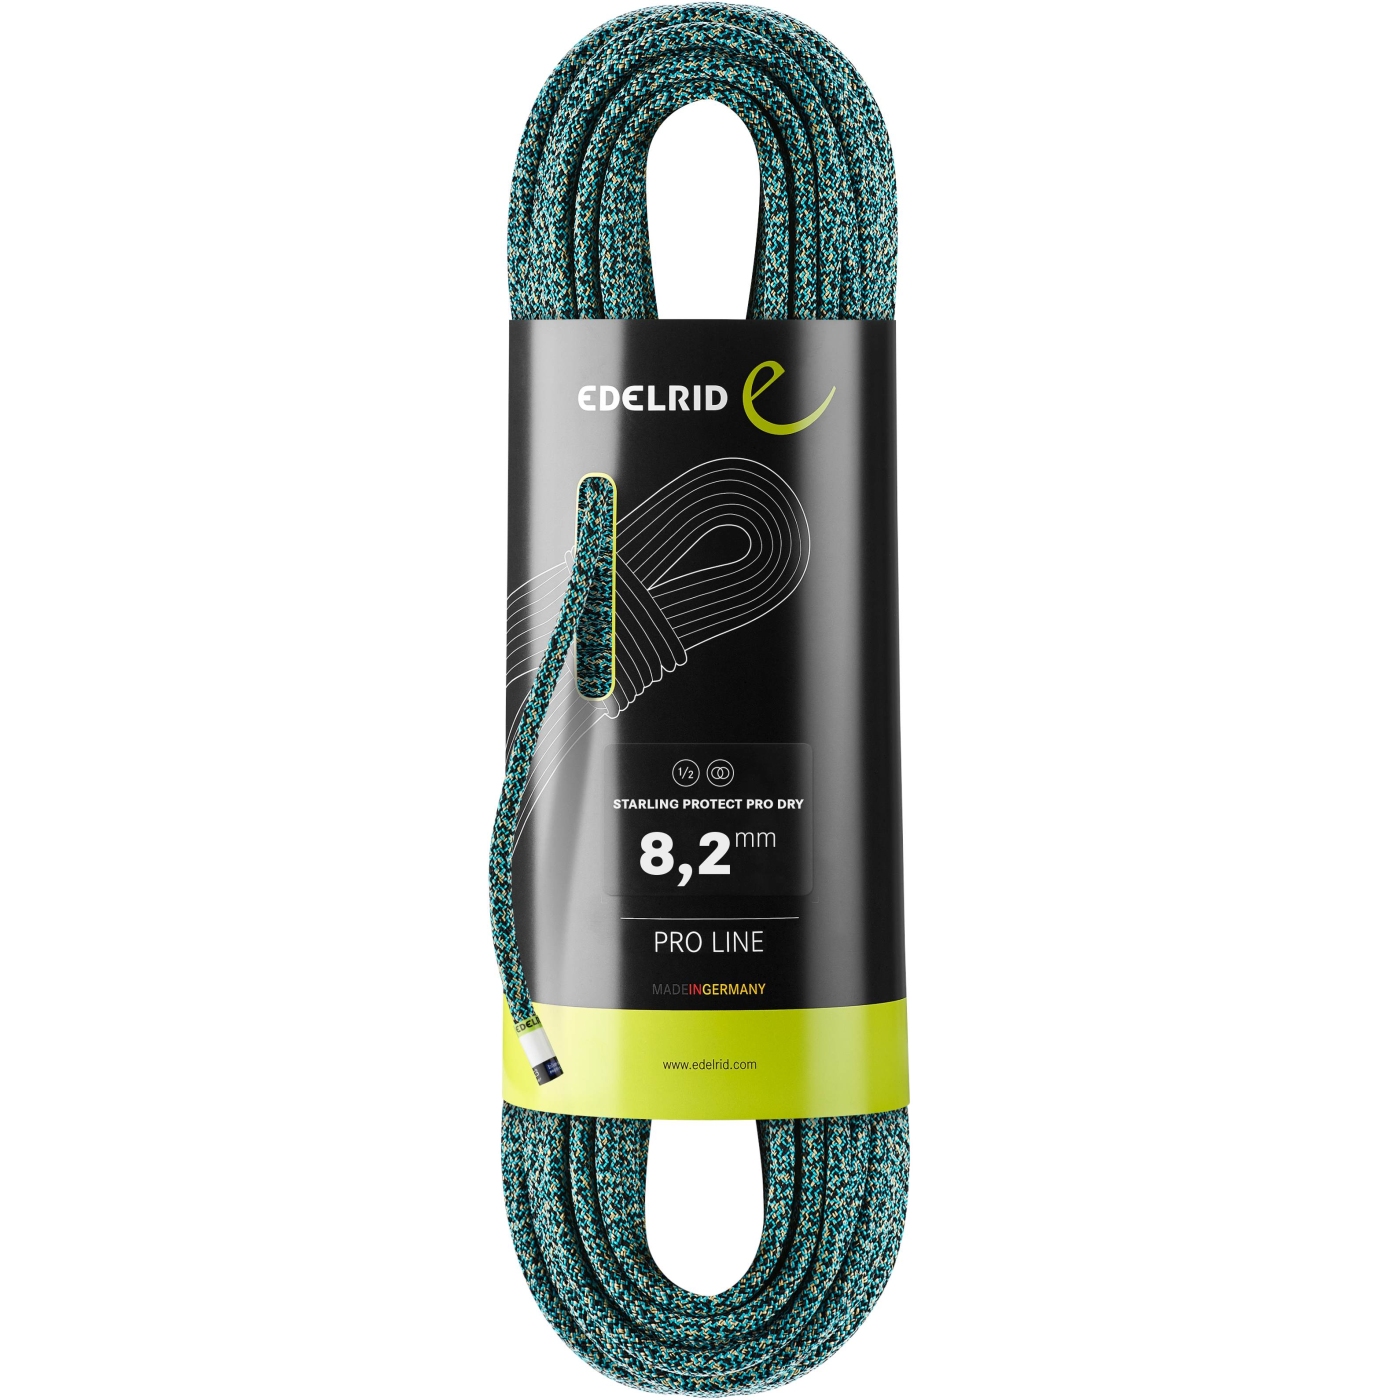 Productfoto van Edelrid Starling Protect Pro Dry 8,2mm Touw - 50m - icemint-night